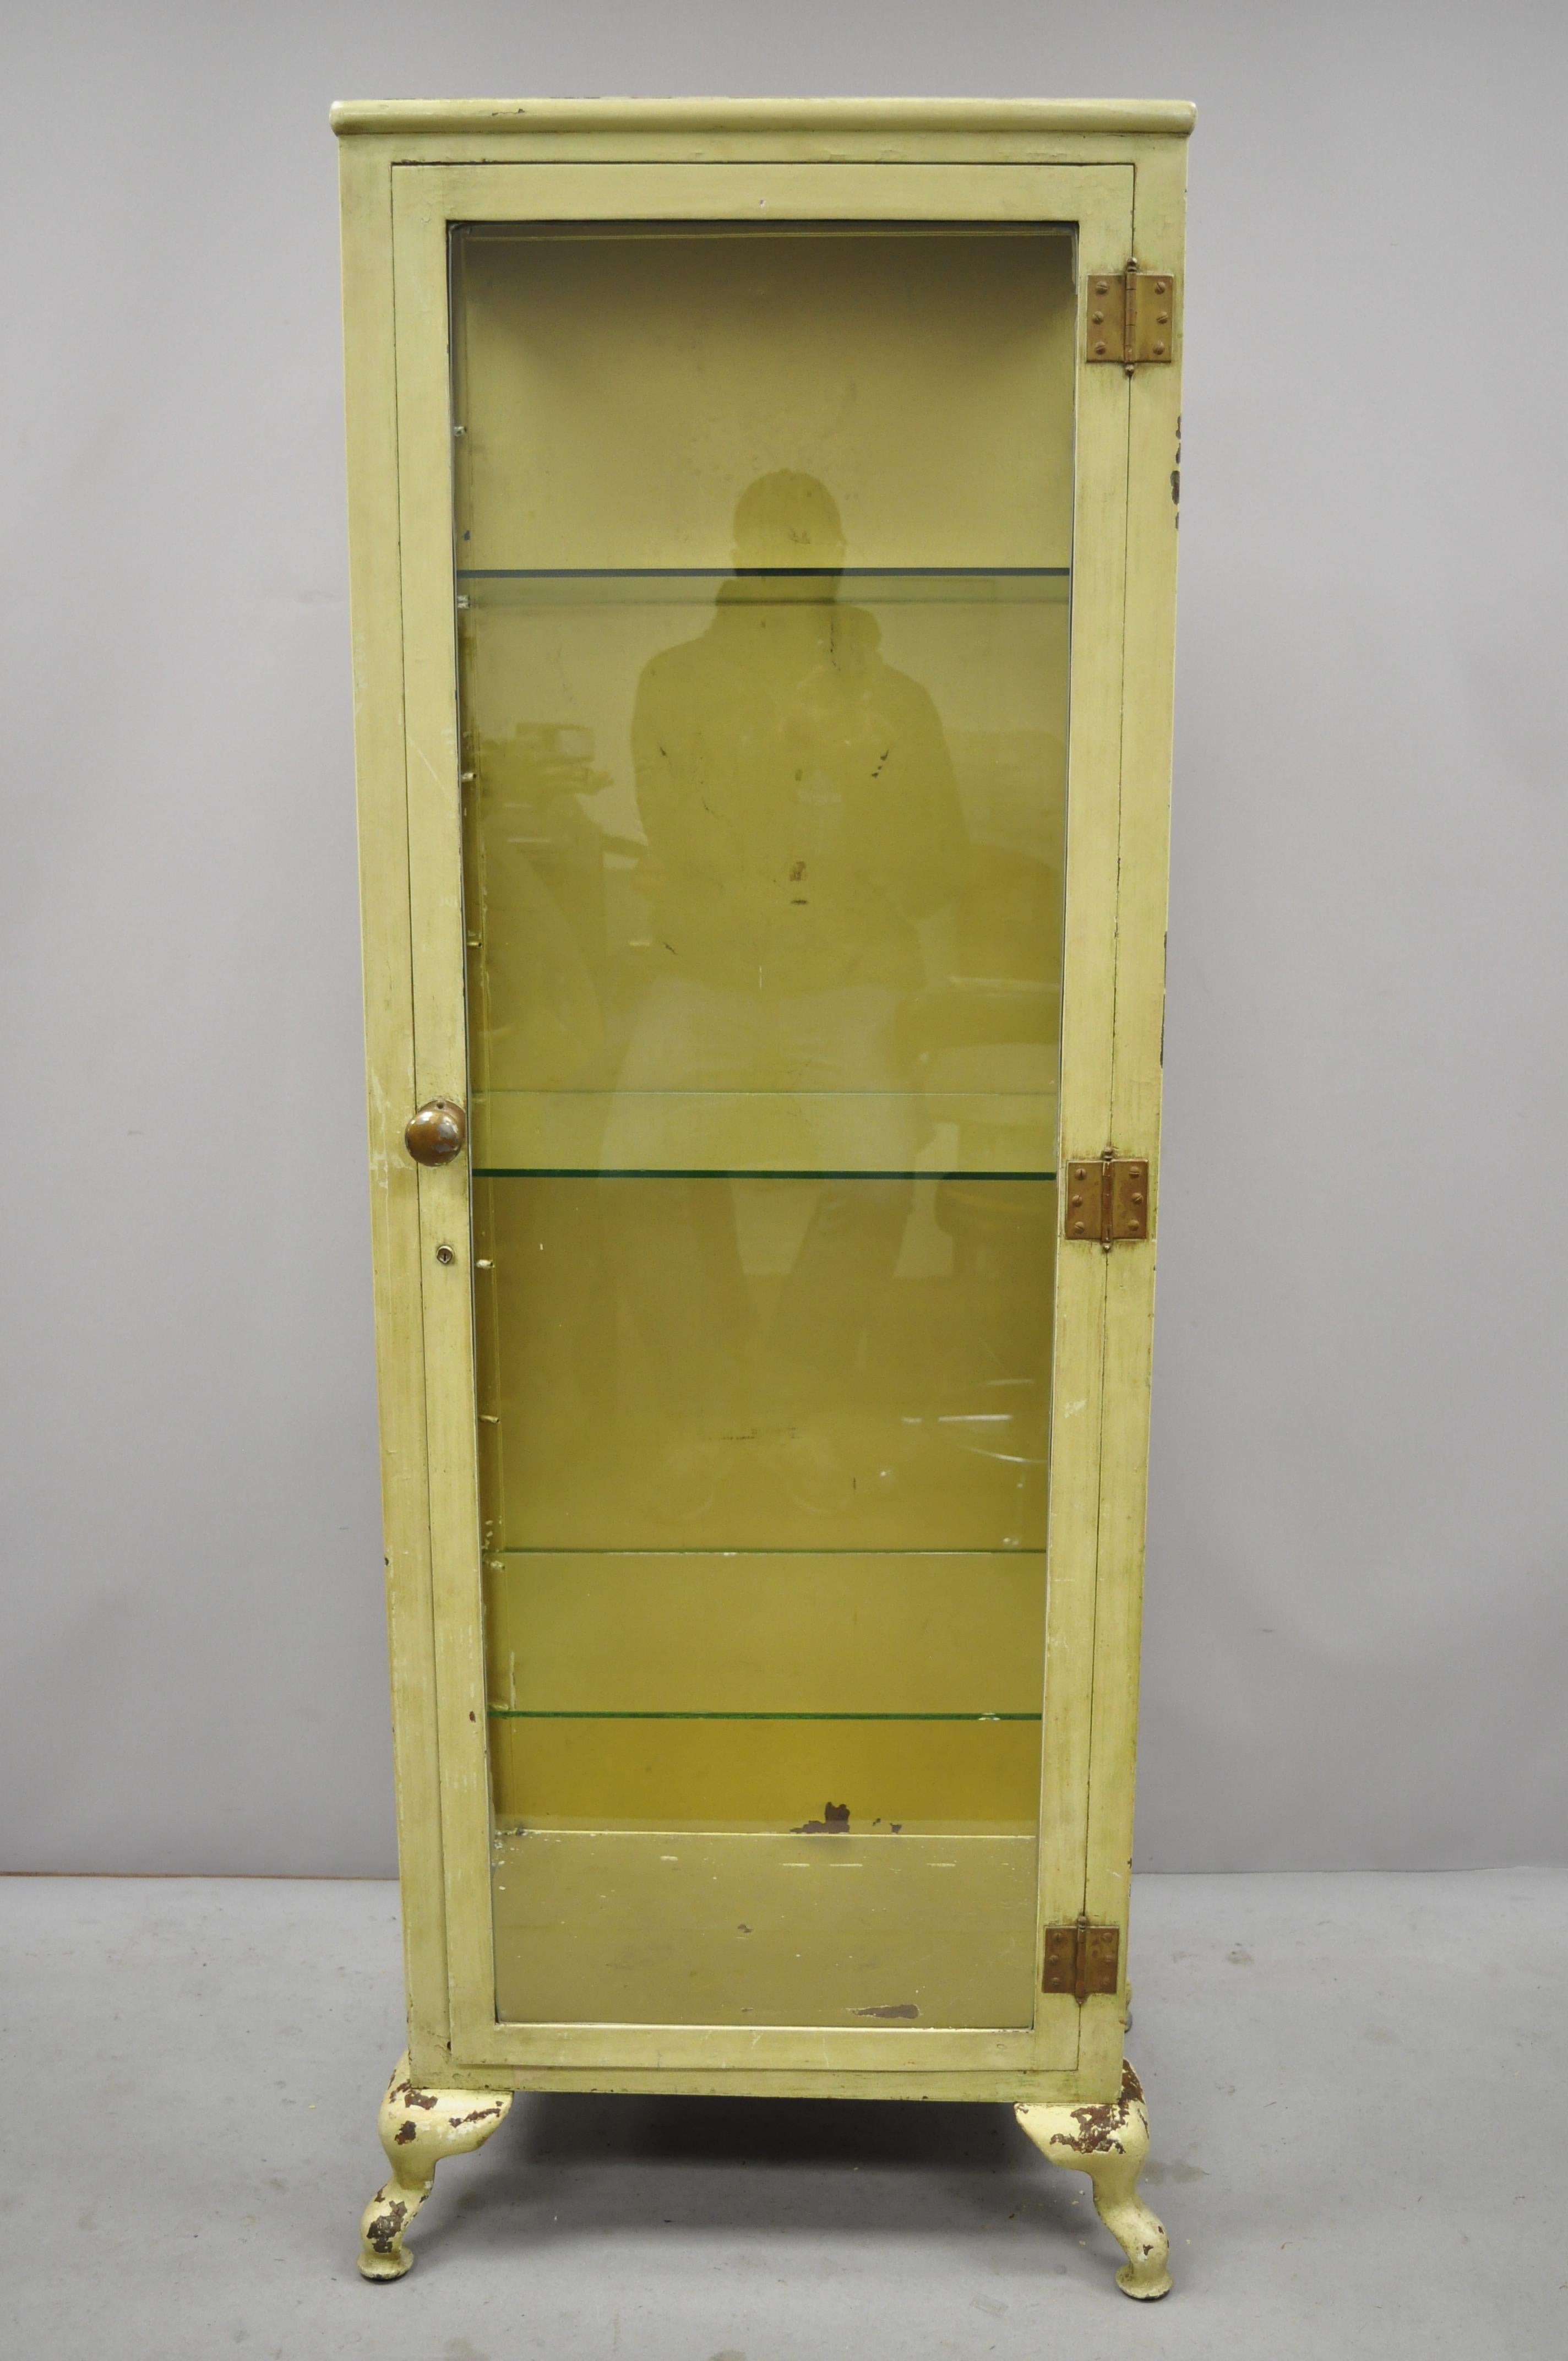 Antique Industrial Metal and Glass Medical Storage Dental Tall Bathroom Cabinet 3